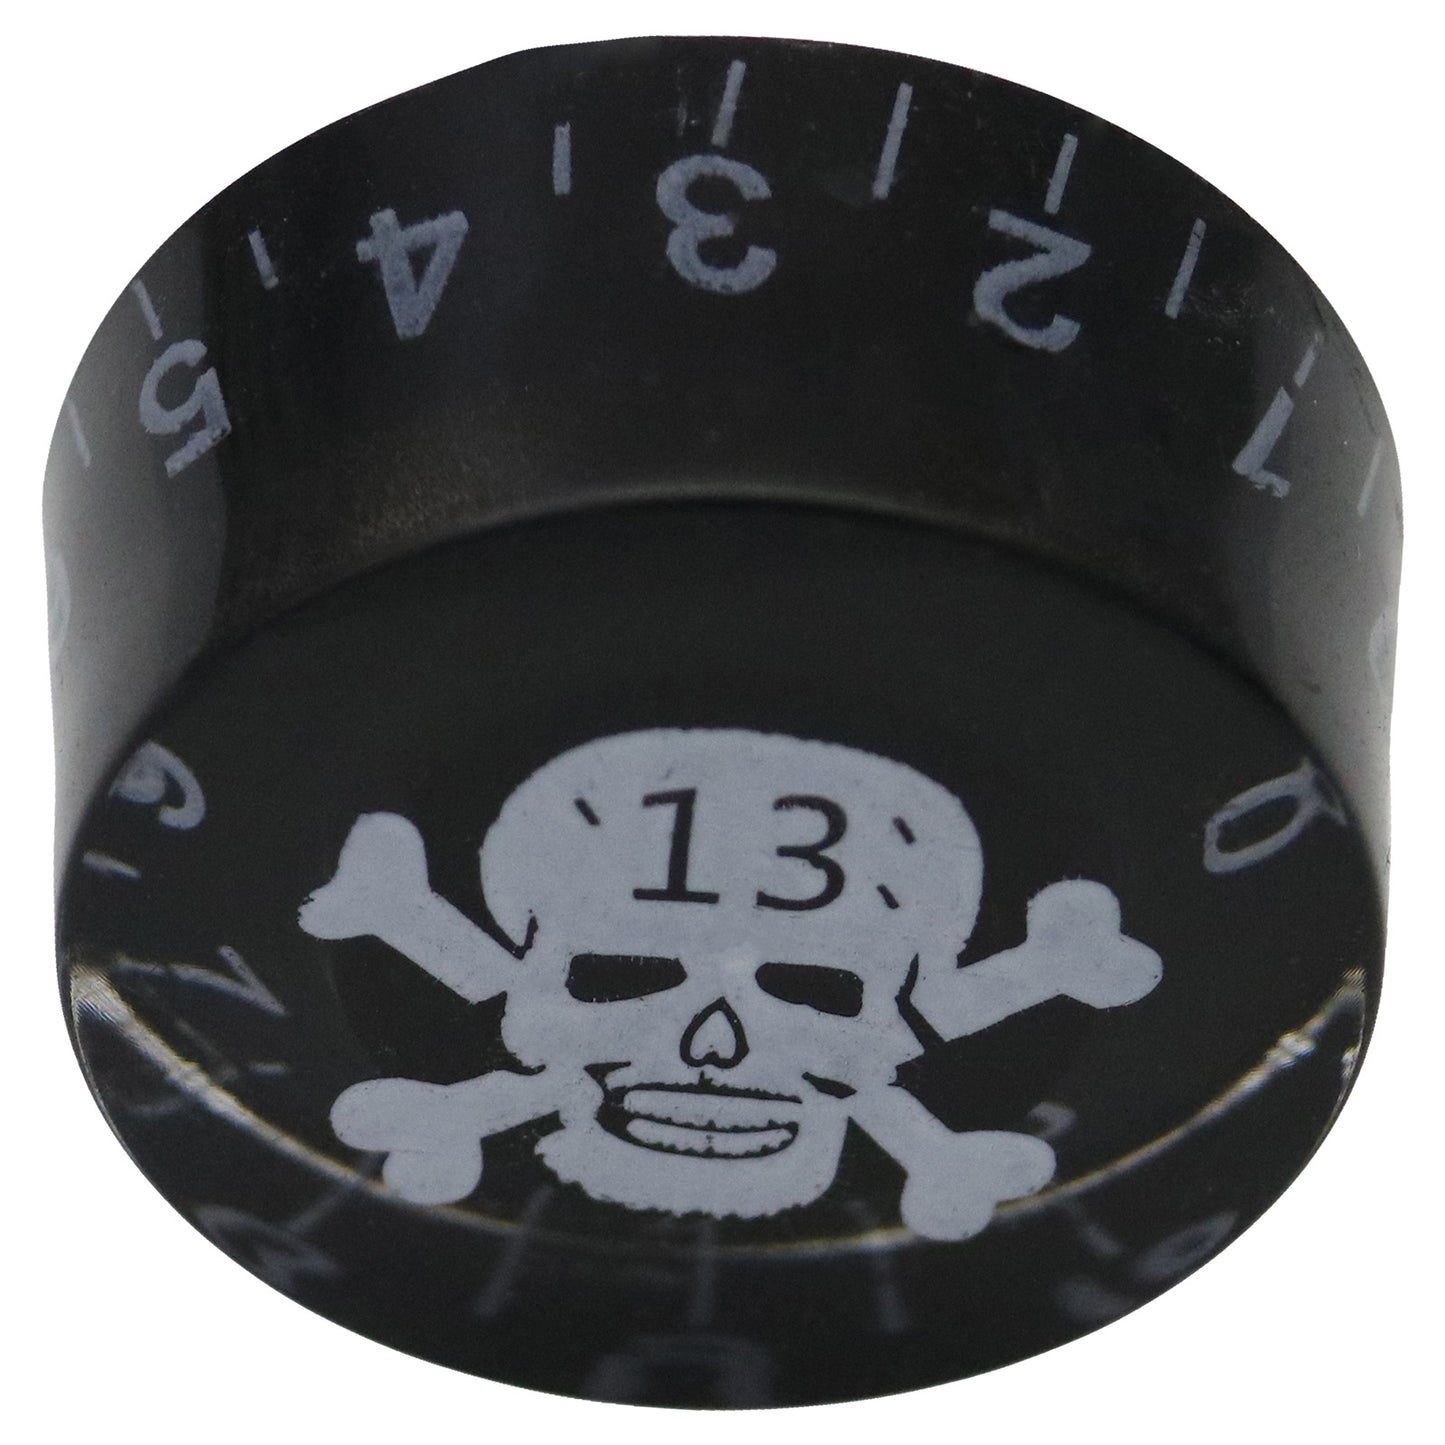 Number Scale Guitar Control Knob With Printed Skull And Crossbones